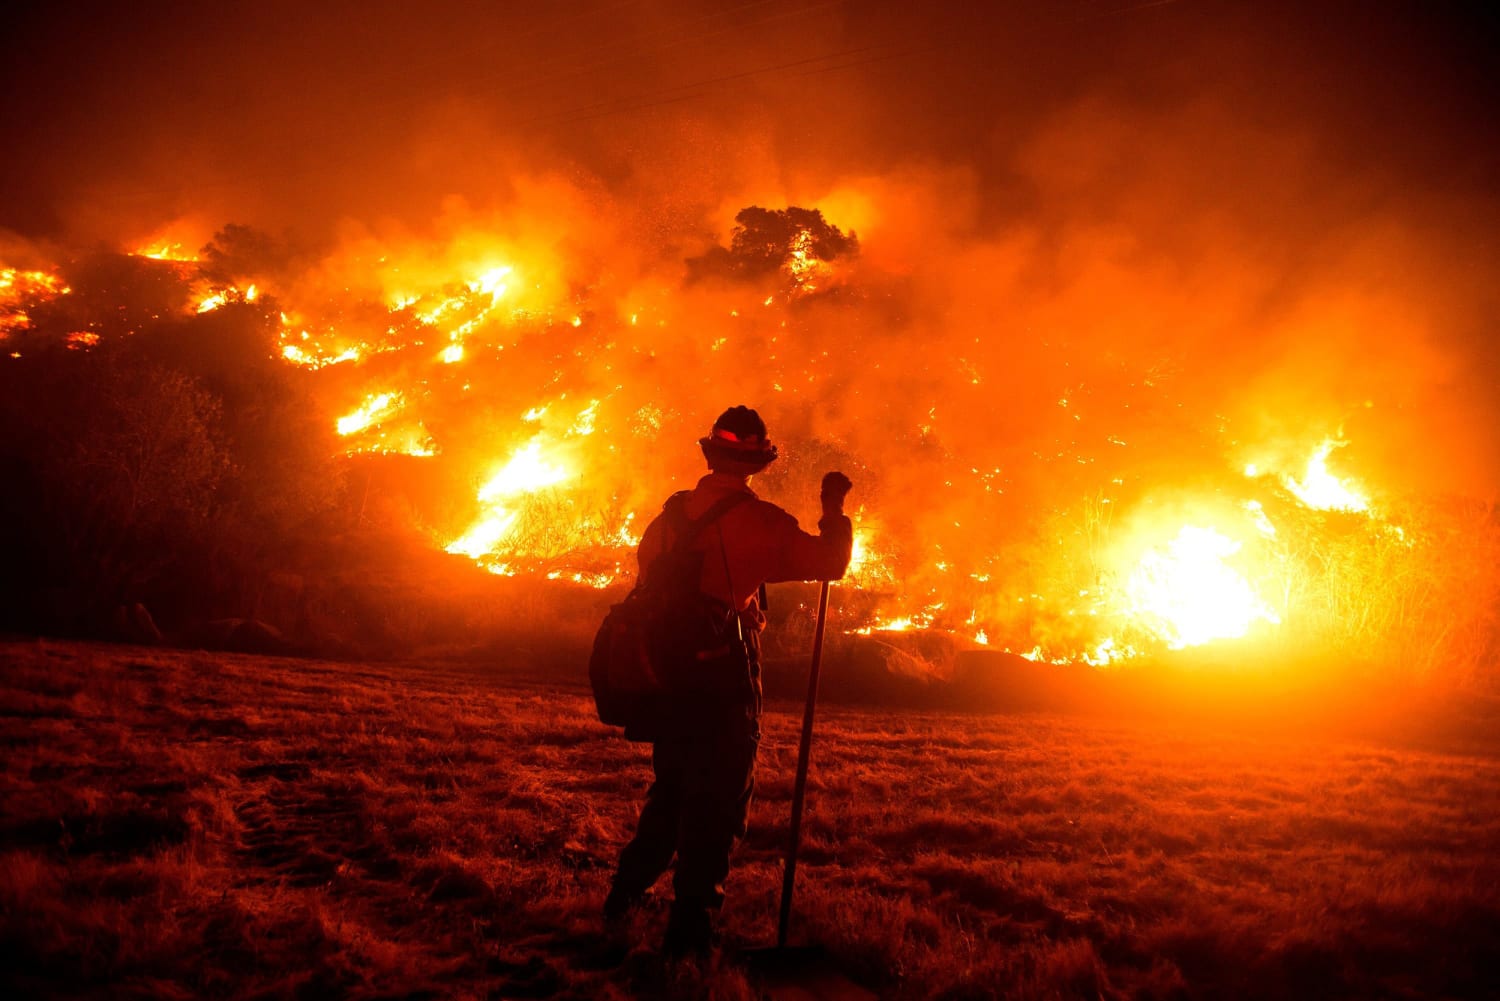 A perfect storm': Why a California wildfire continues to elude firefighters